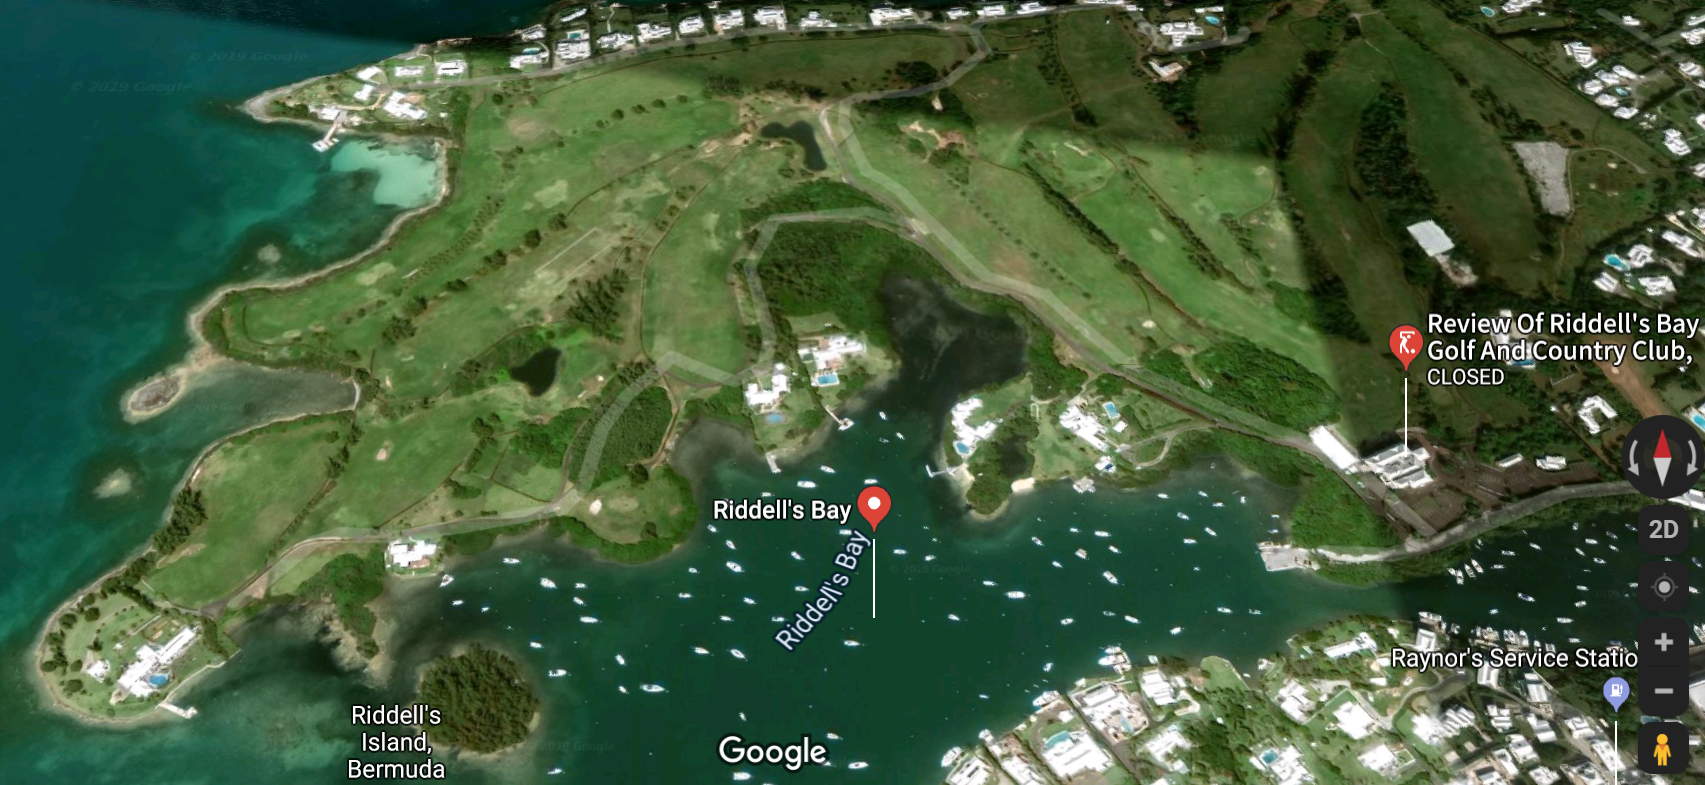 Change.org #Petition “PRESERVE #BERMUDA RECREATIONAL LAND” – [Ex. Riddell’s Bay Golf & Country Club]